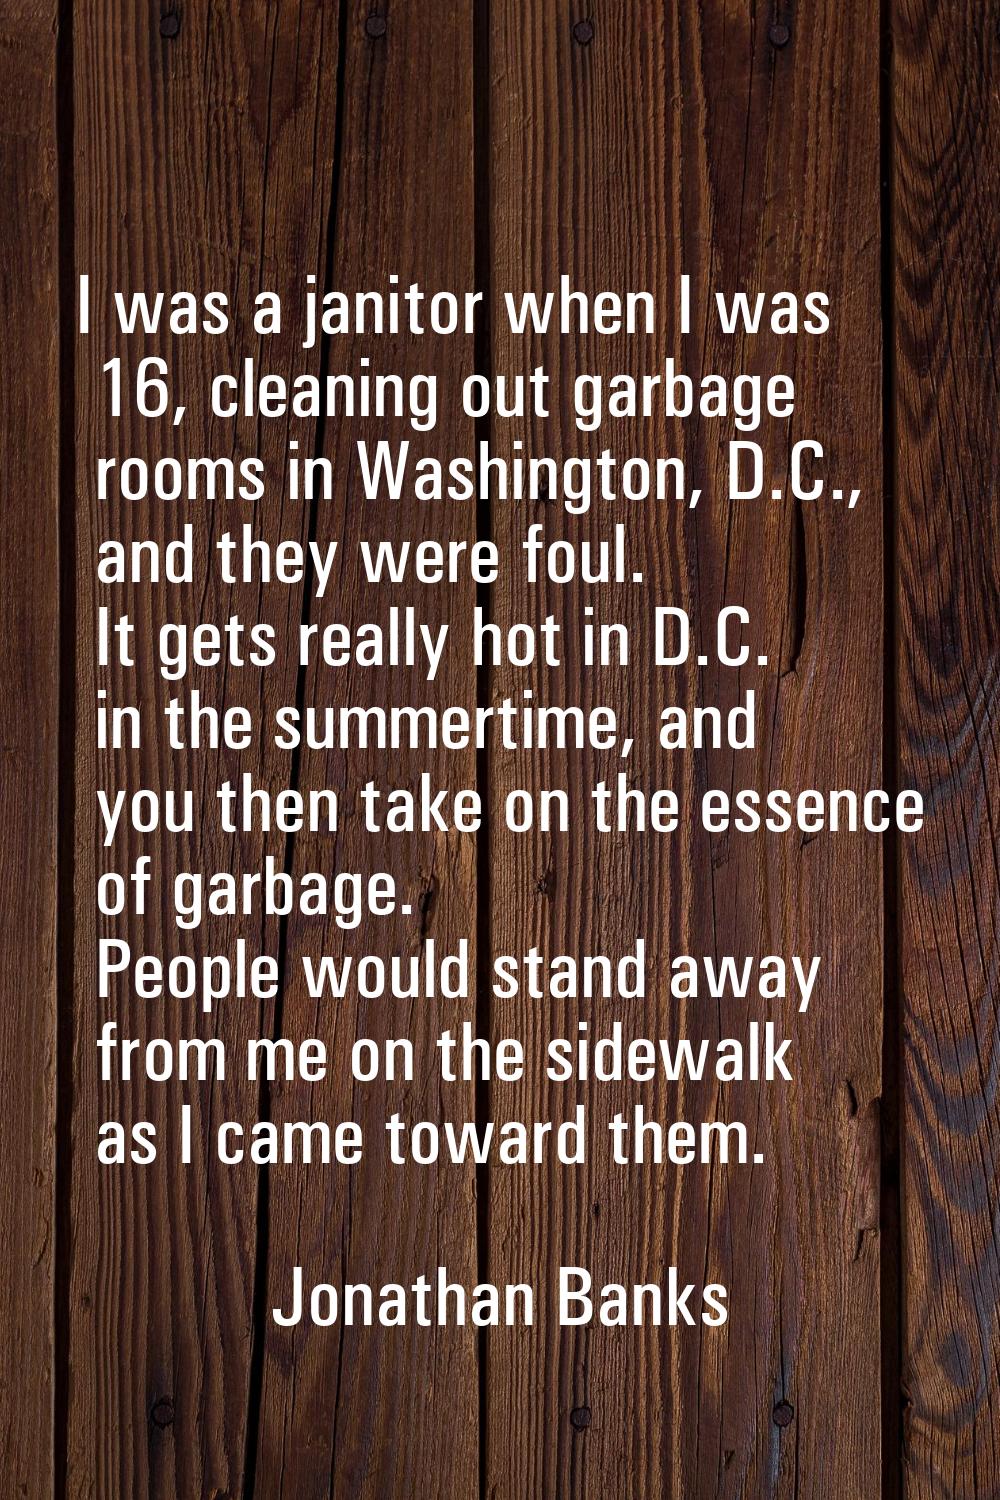 I was a janitor when I was 16, cleaning out garbage rooms in Washington, D.C., and they were foul. 